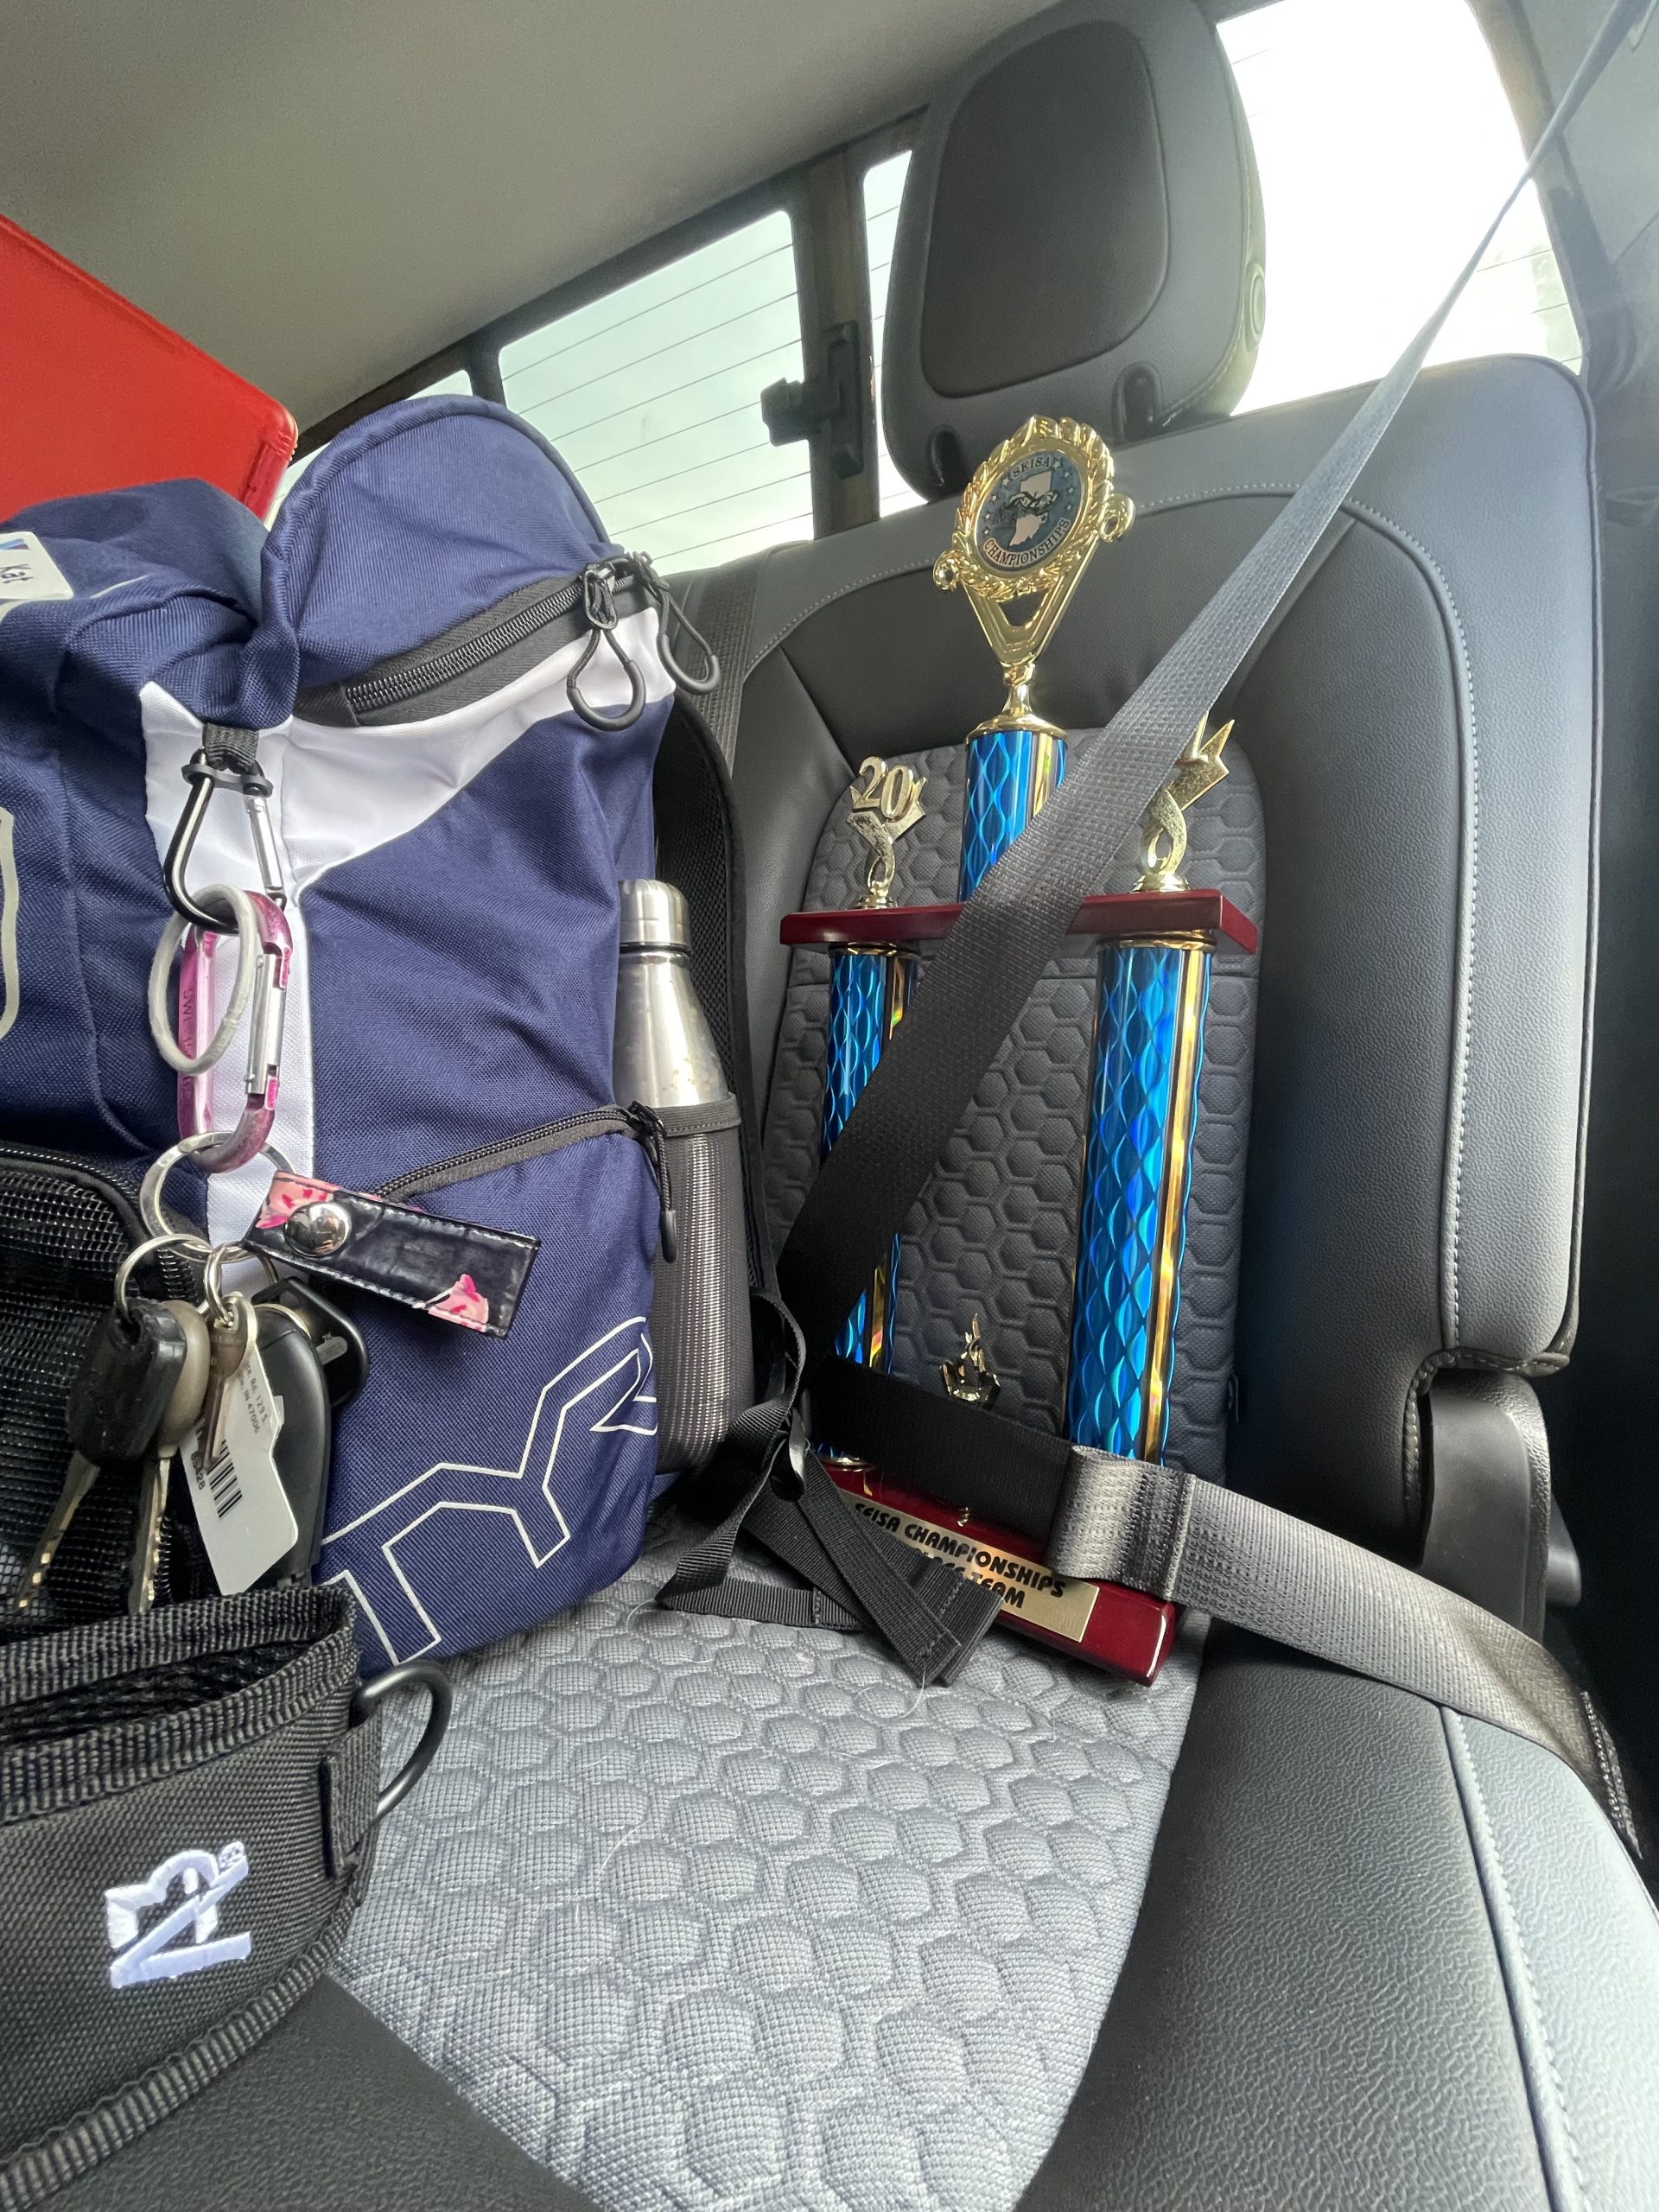 S.E.I.S.A. second place trophy strapped into back seat of the coach car